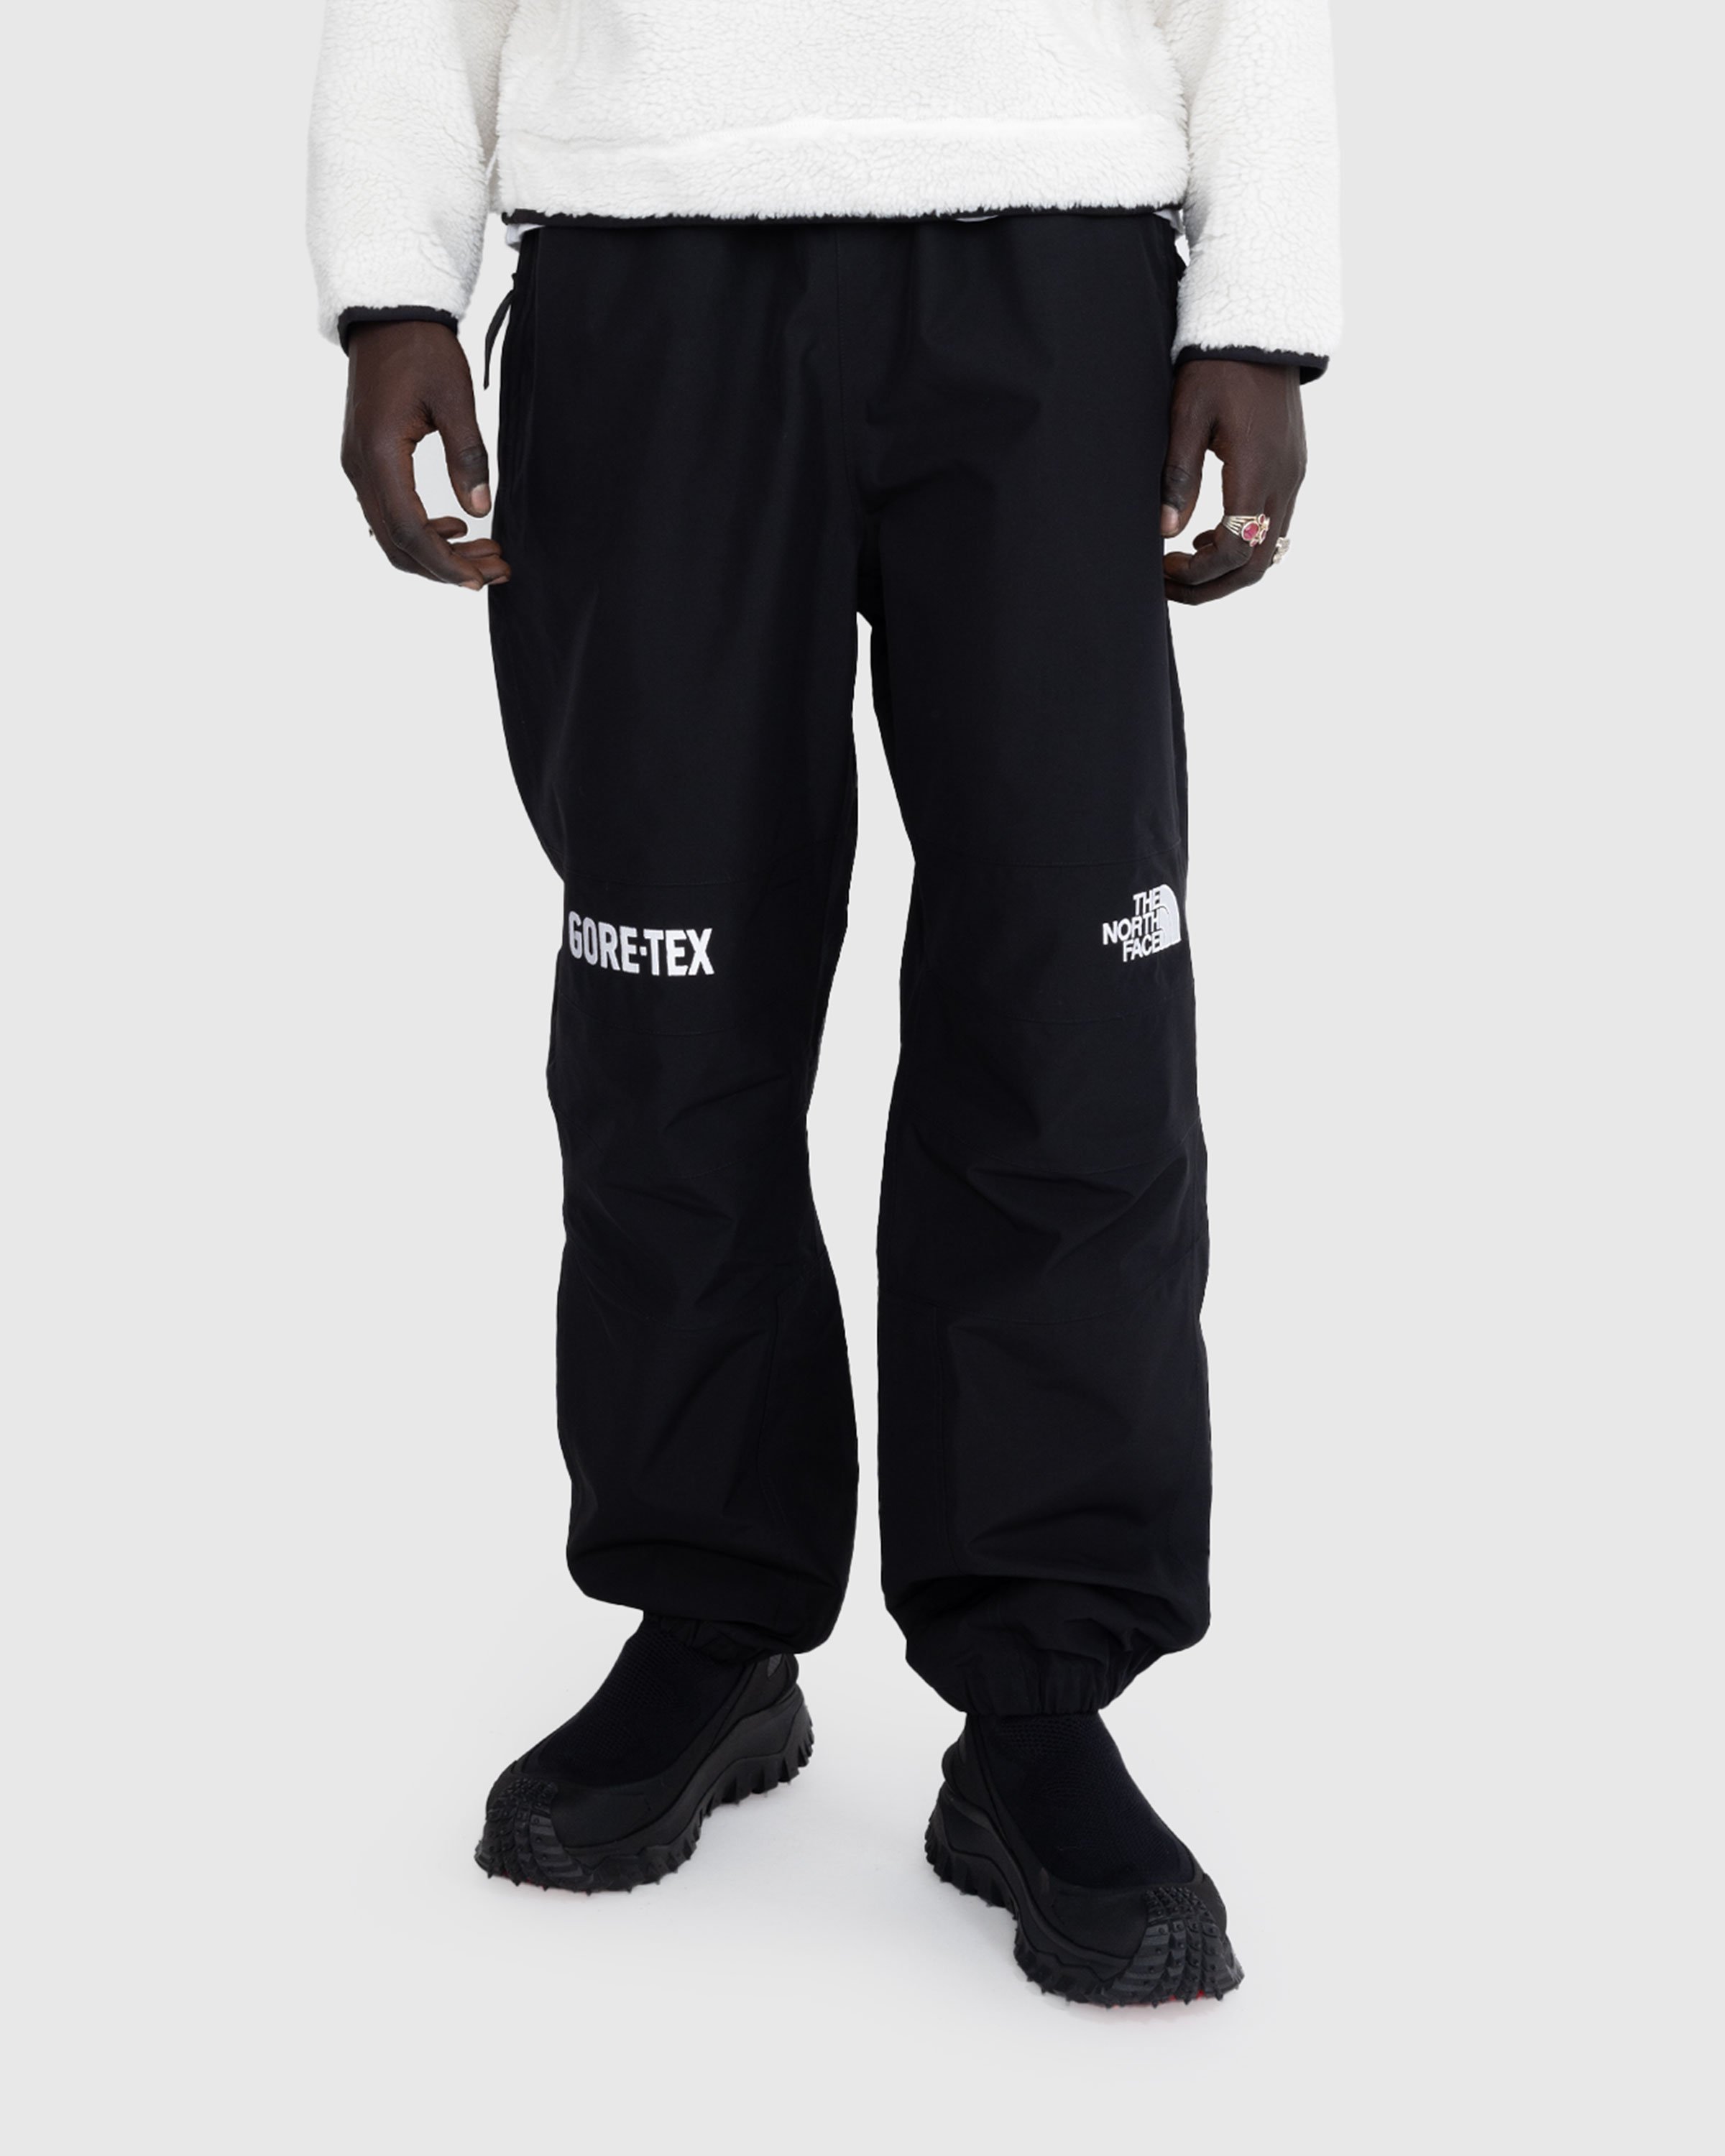 The North Face - GORE-TEX Mountain Pants Black - Clothing - Black - Image 2